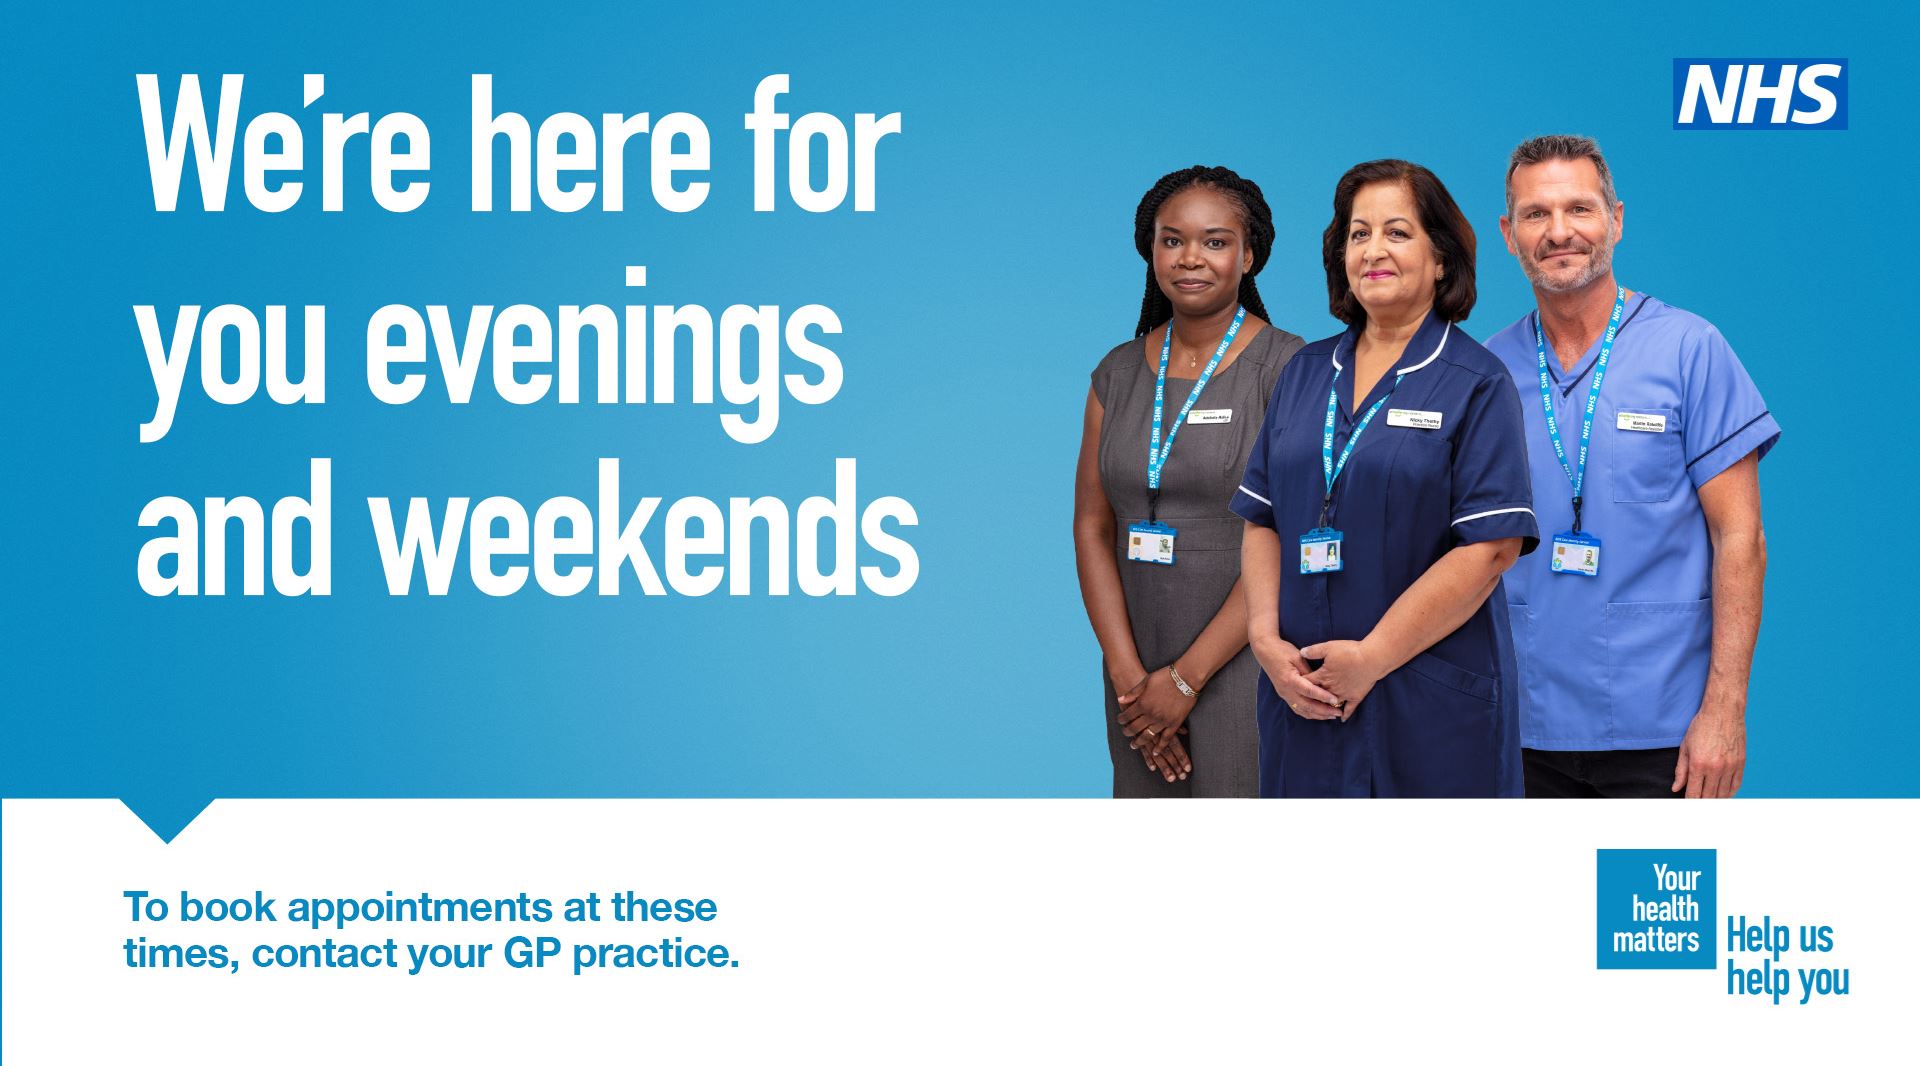 Enhanced Access, Image GP Practice Staff advertising evening and weekend appointments